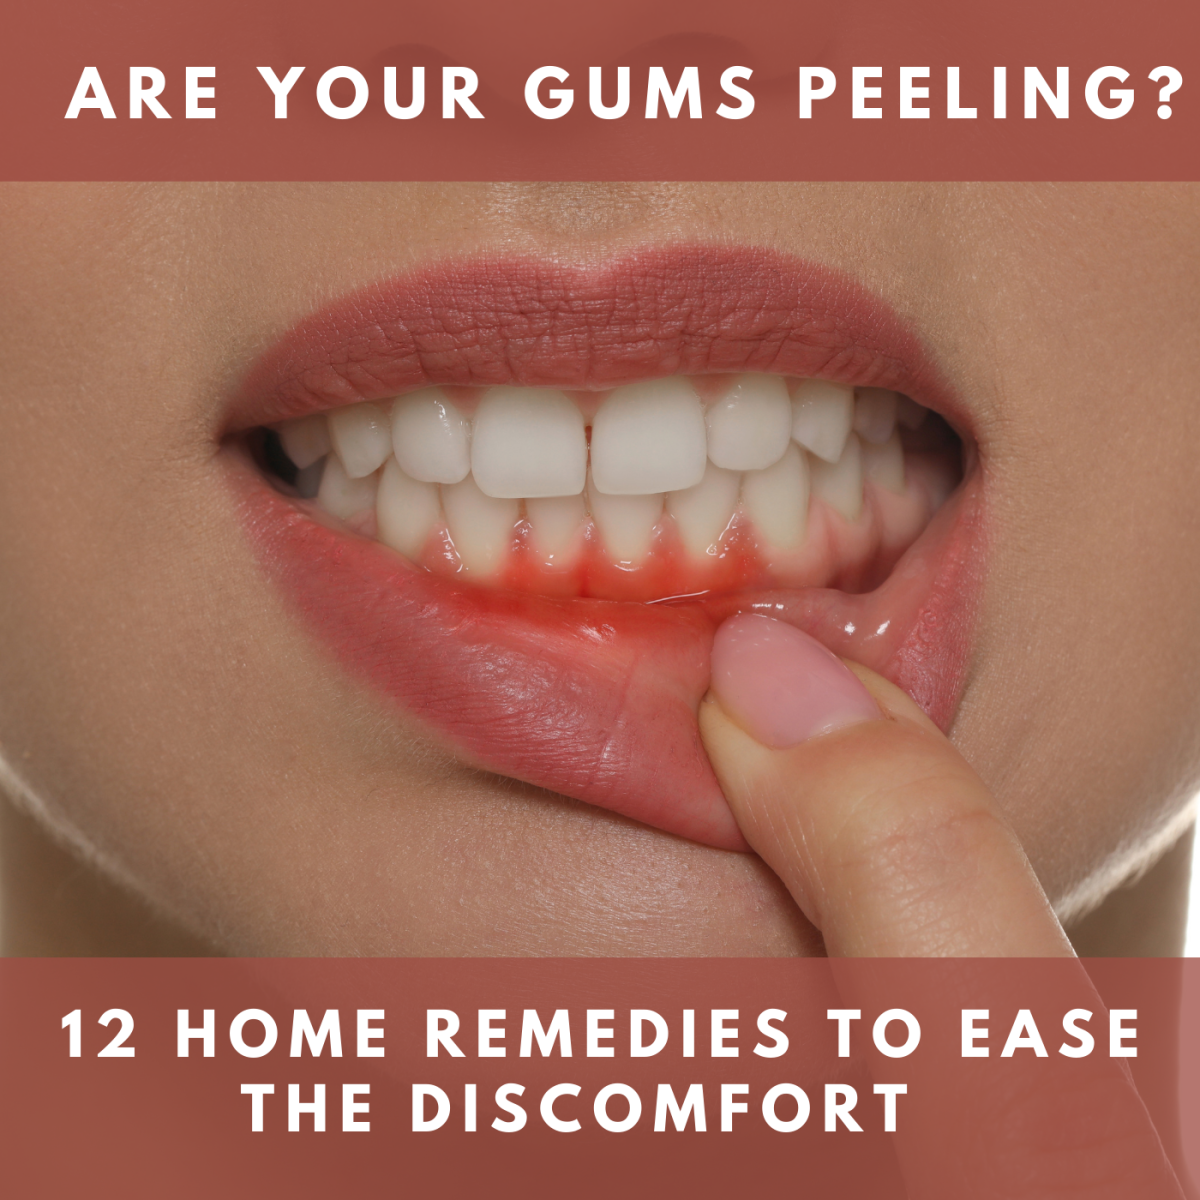 Home remedies for peeling gums